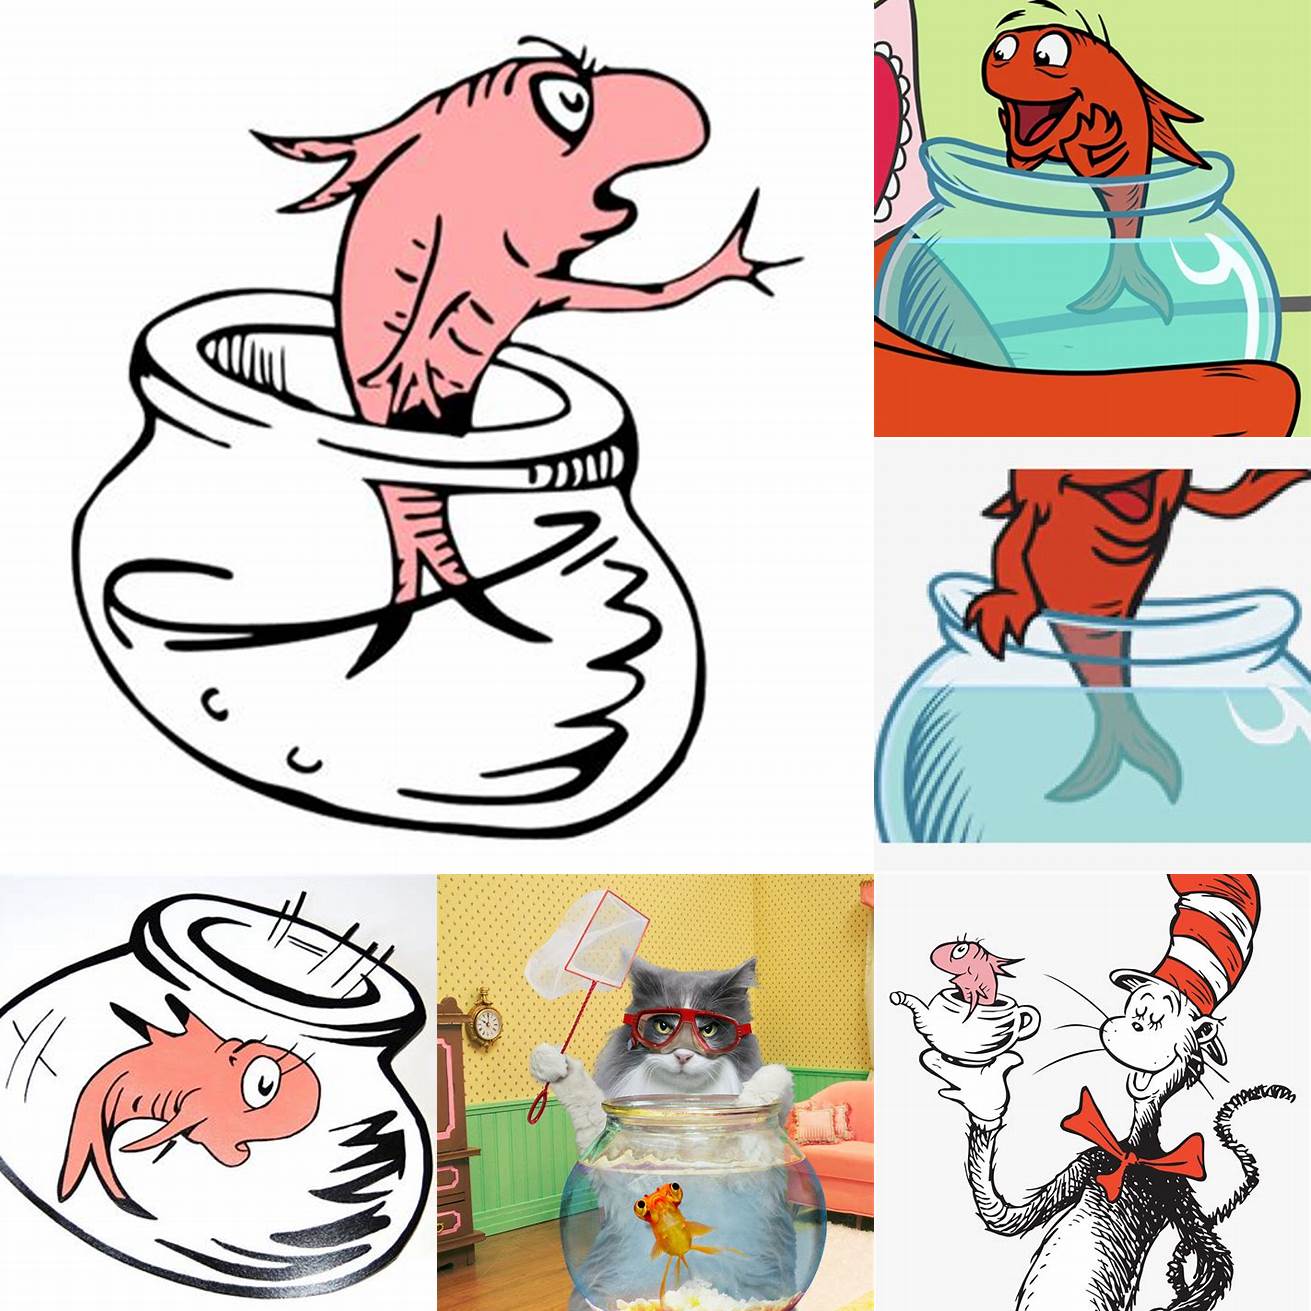 Take a drink every time the fish tries to stop the Cat in the Hat